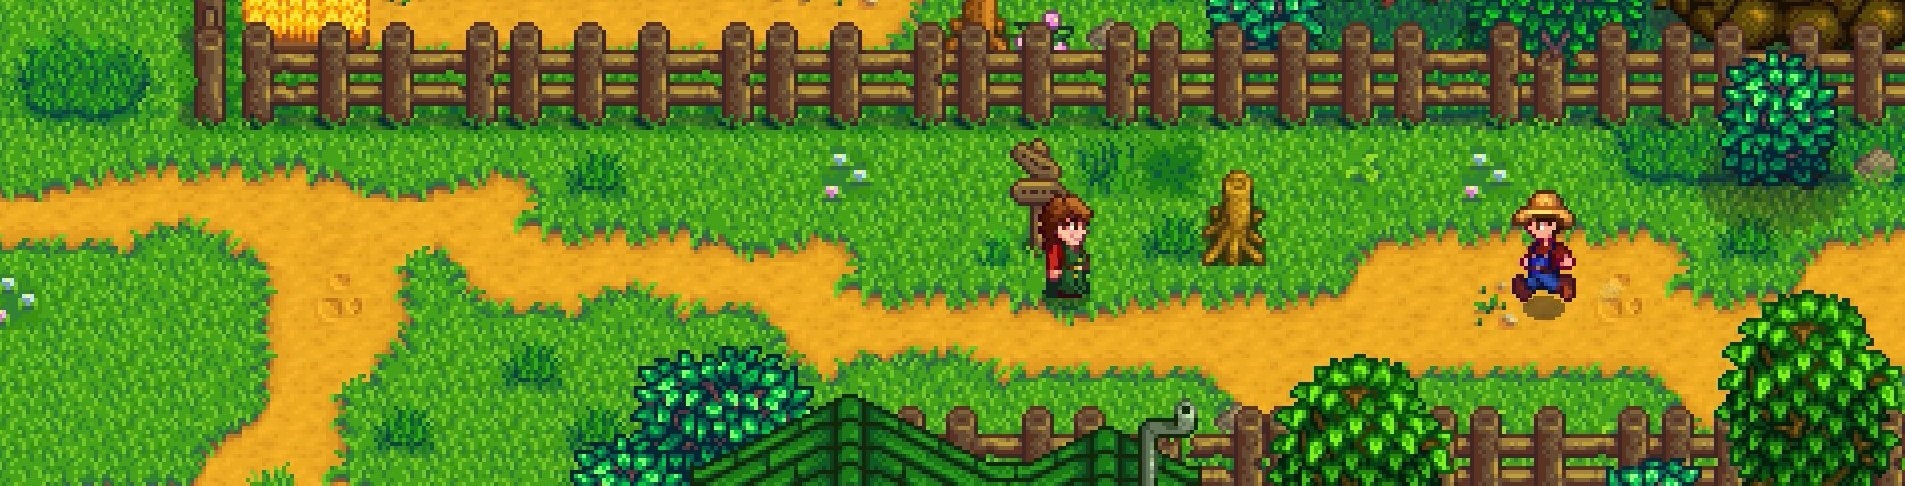 Image for Serf and turf: A week in Stardew Valley